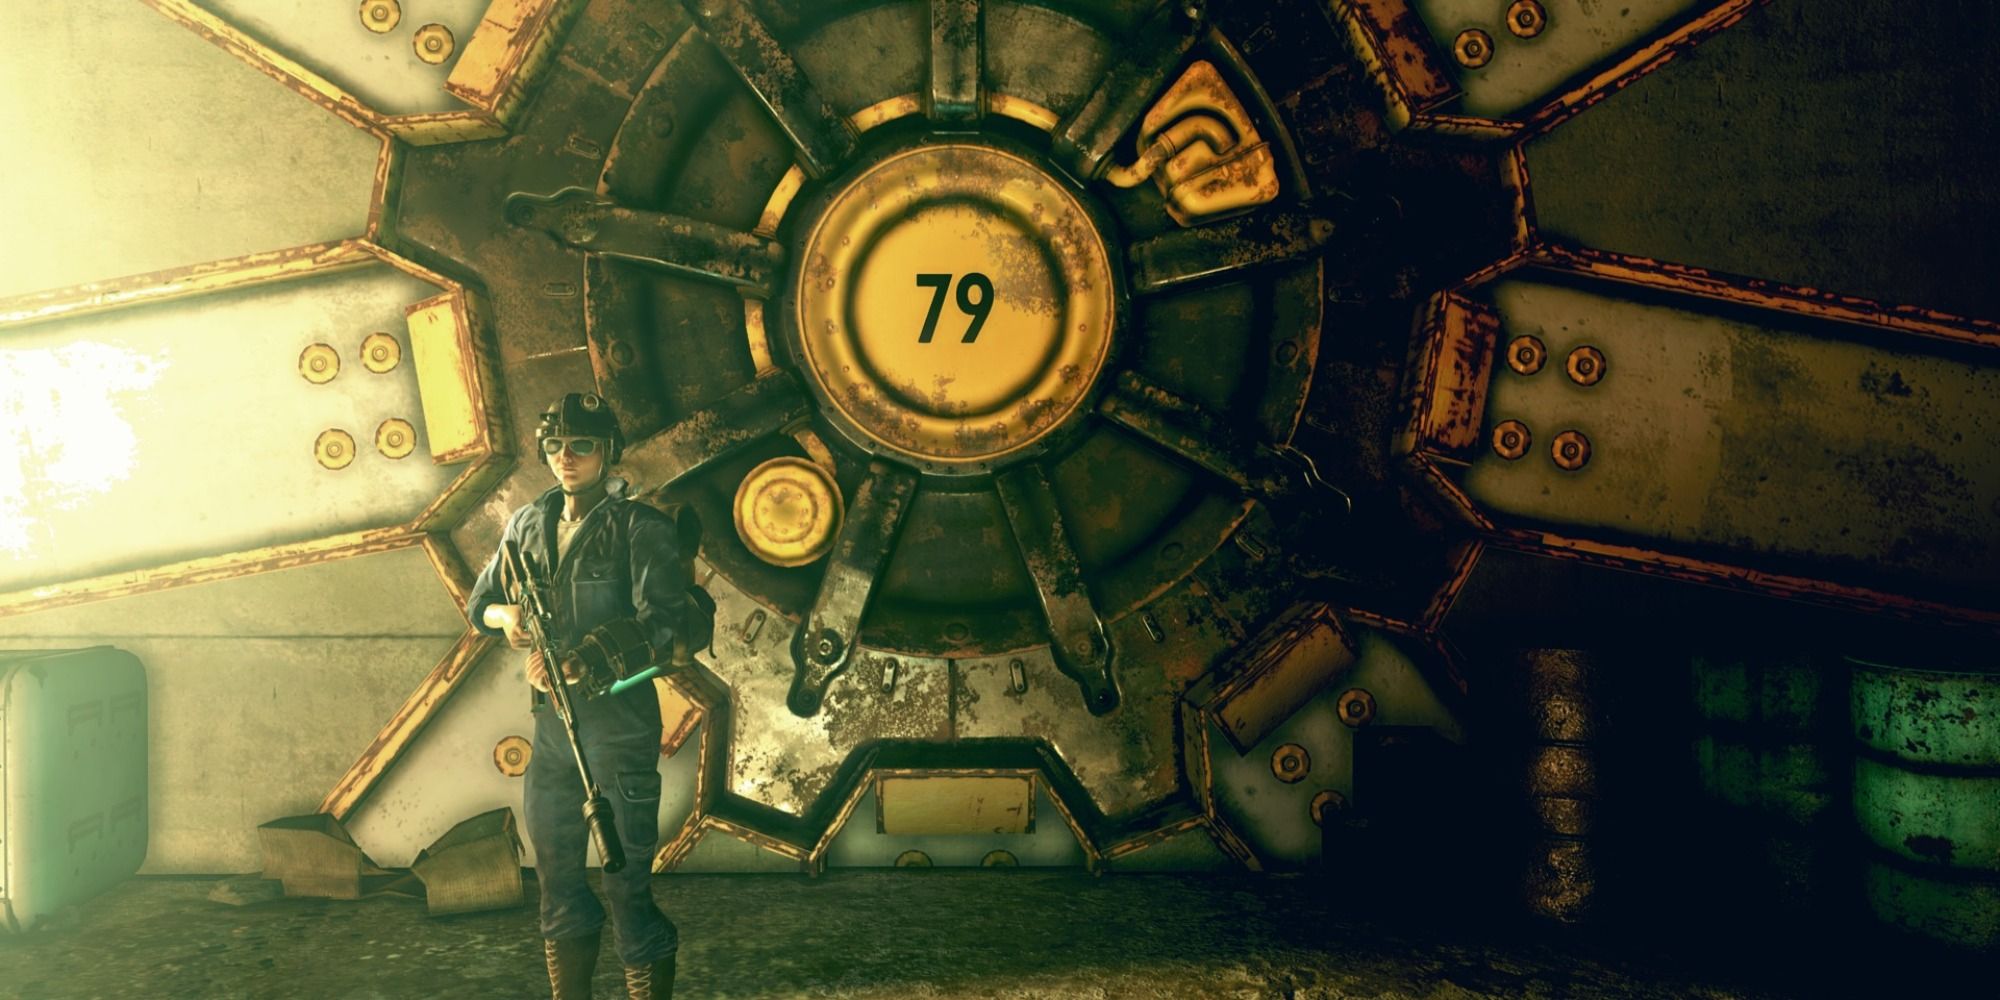 Vault 79 closed gate entrance with player character posing in front